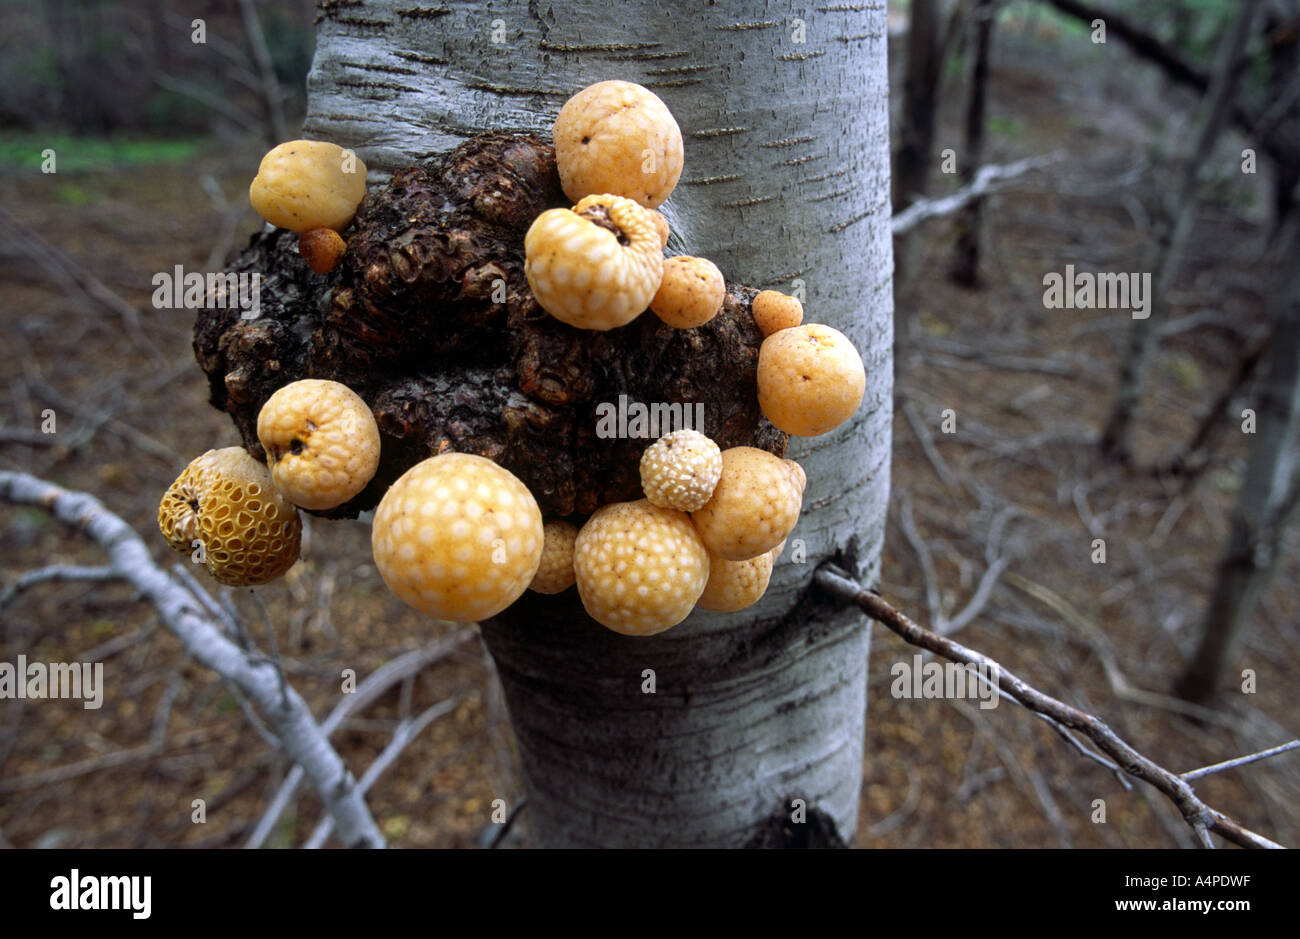 Patagonian fungus named Pan del Indio by the locals growing on trees Cyttaria darwinii Patagonia South America Stock Photo